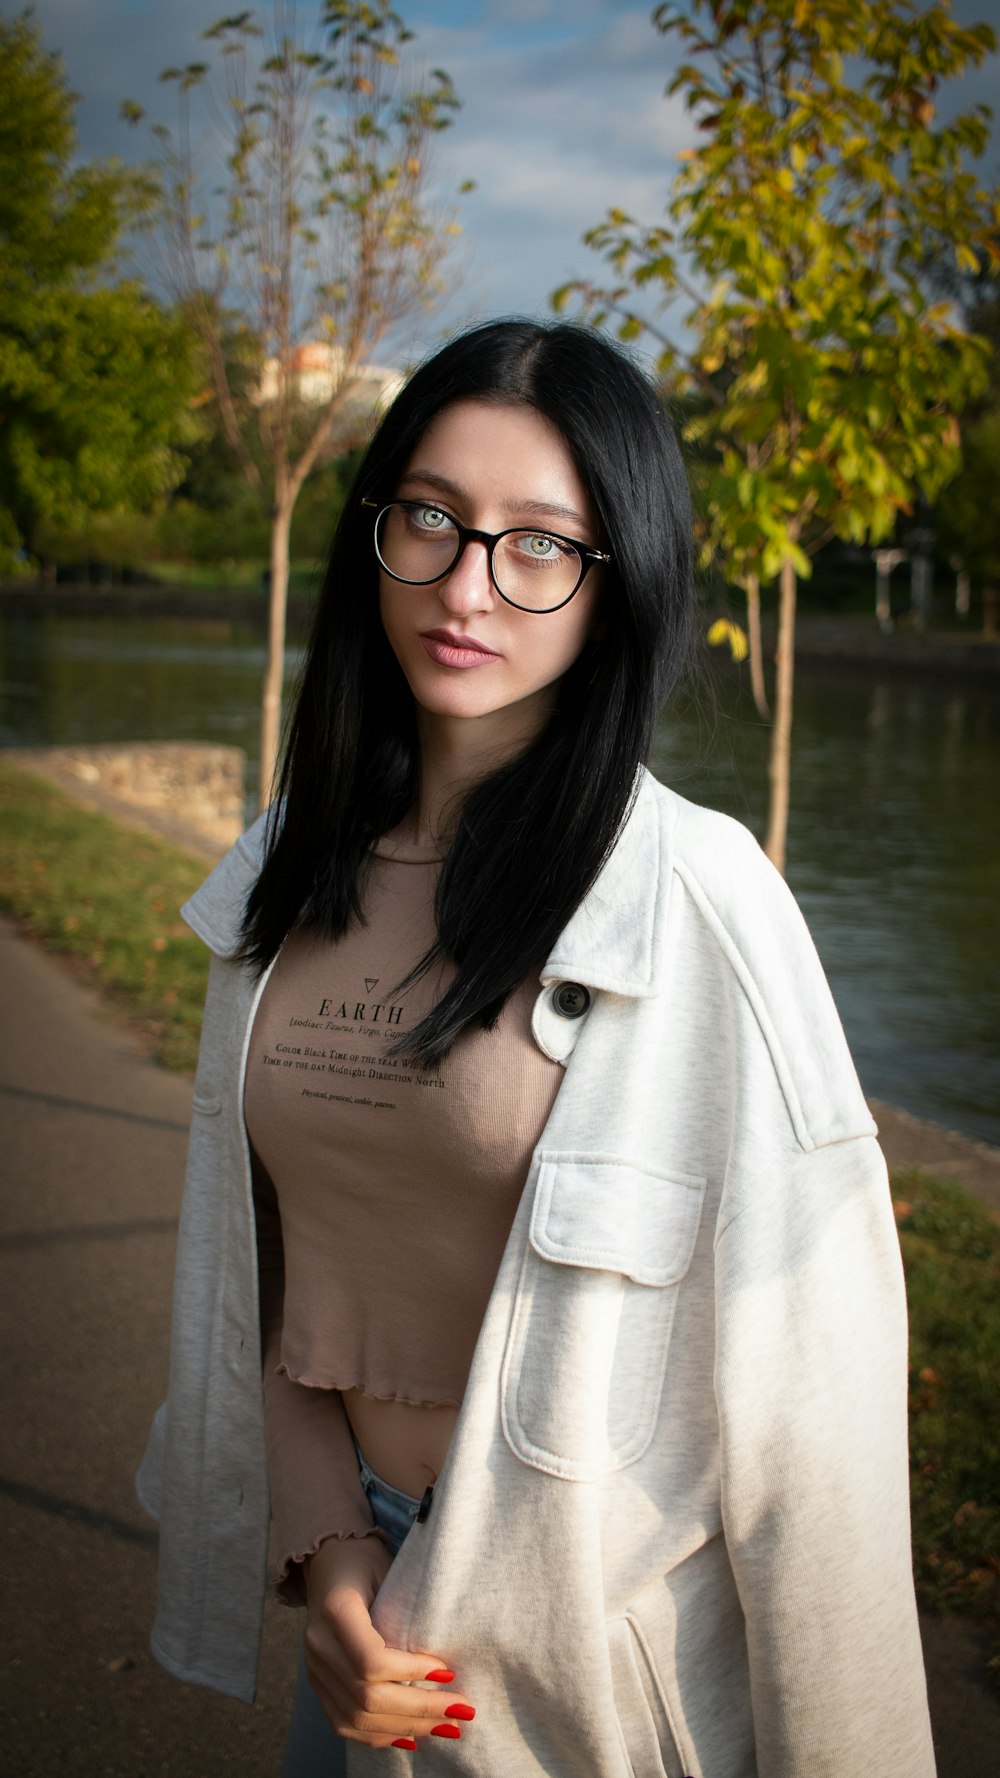 a woman wearing glasses and a white jacket